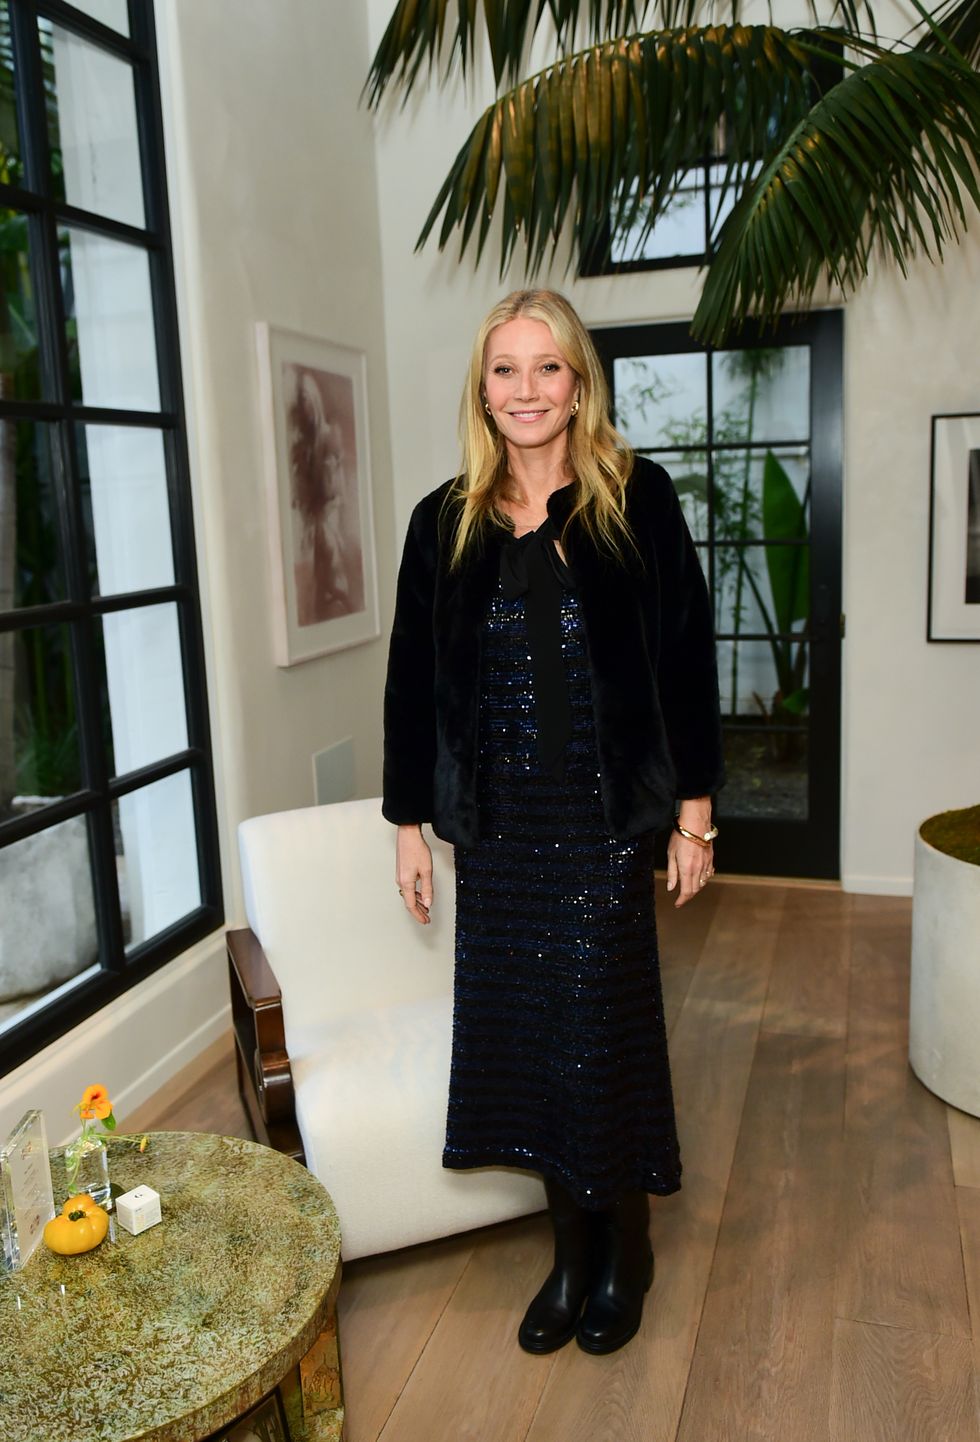 los angeles, california march 15 gwyneth paltrow attends as gwyneth paltrow and goop celebrate the launch of goopglow vita c brightening eye cream on march 15, 2023 in los angeles, california photo by vivien killileagetty images for goop